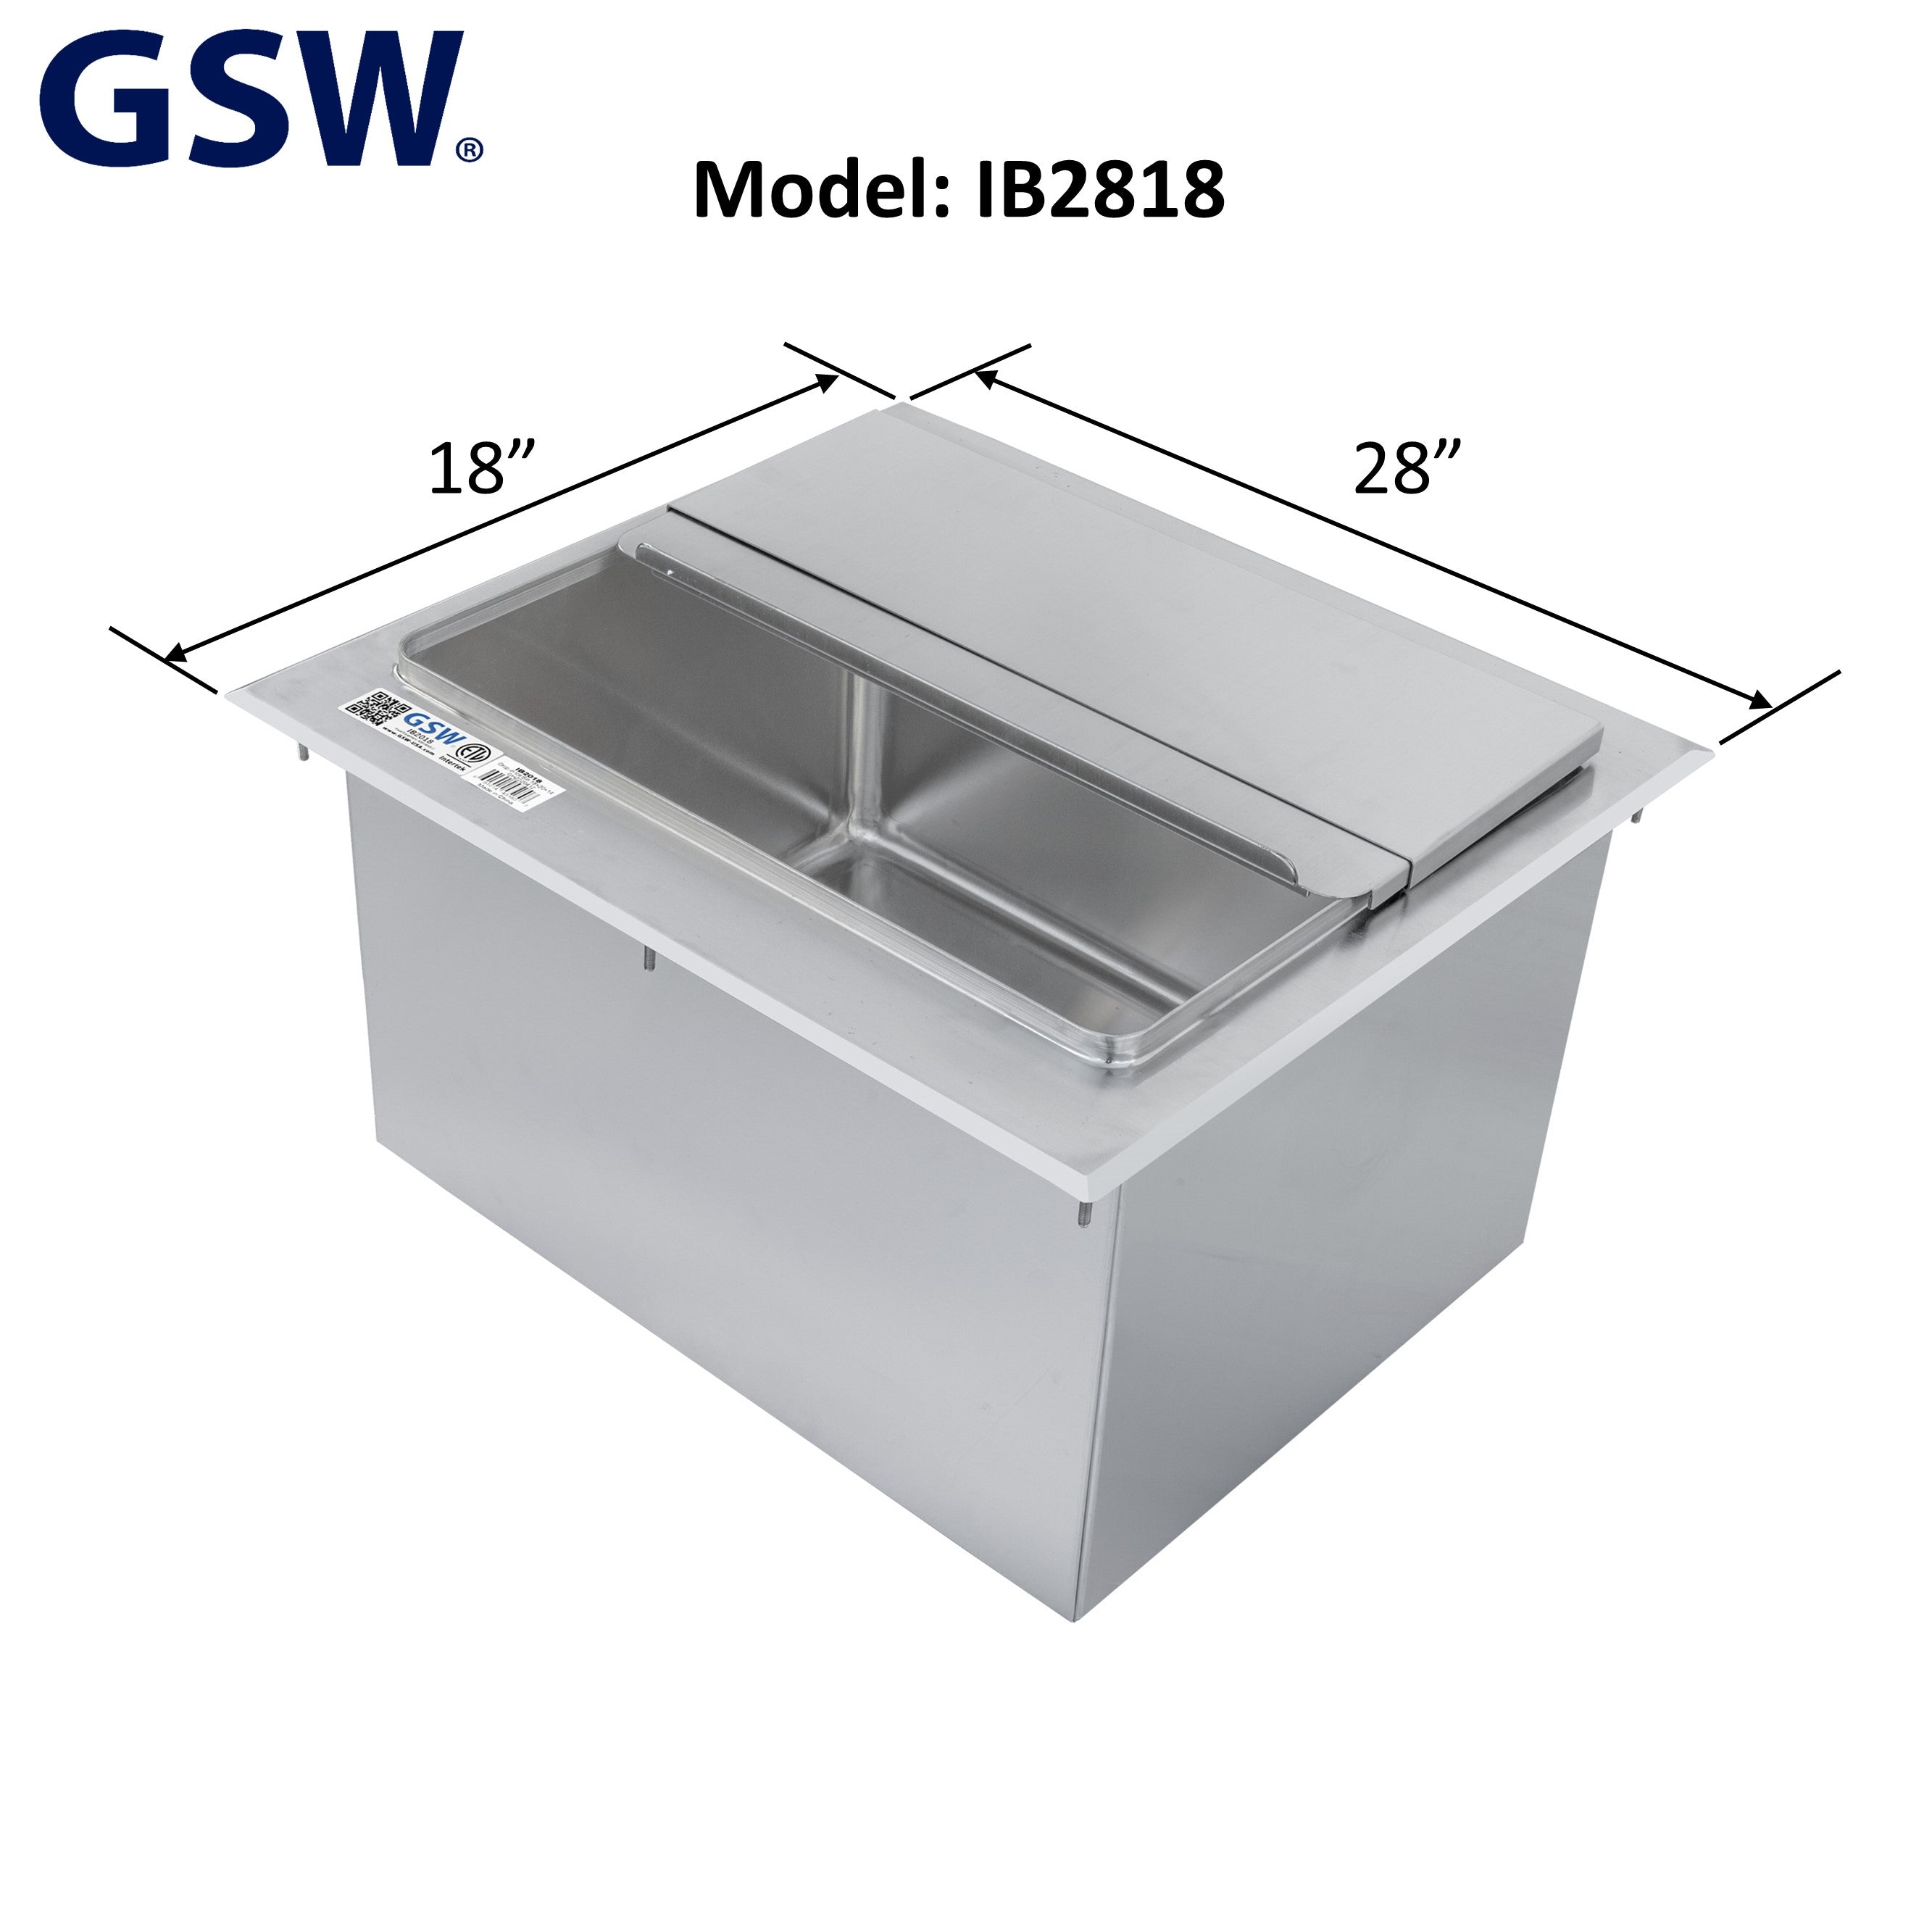 GSW IB2818 Stainless Steel Drop-In Ice Bin 18”D x 28”W x 14”H with Removable Sliding Cover, 9” x 14” Double Walled Ice Bin with 1” NPT Drain, for Storing Ice Cold Wine Beer